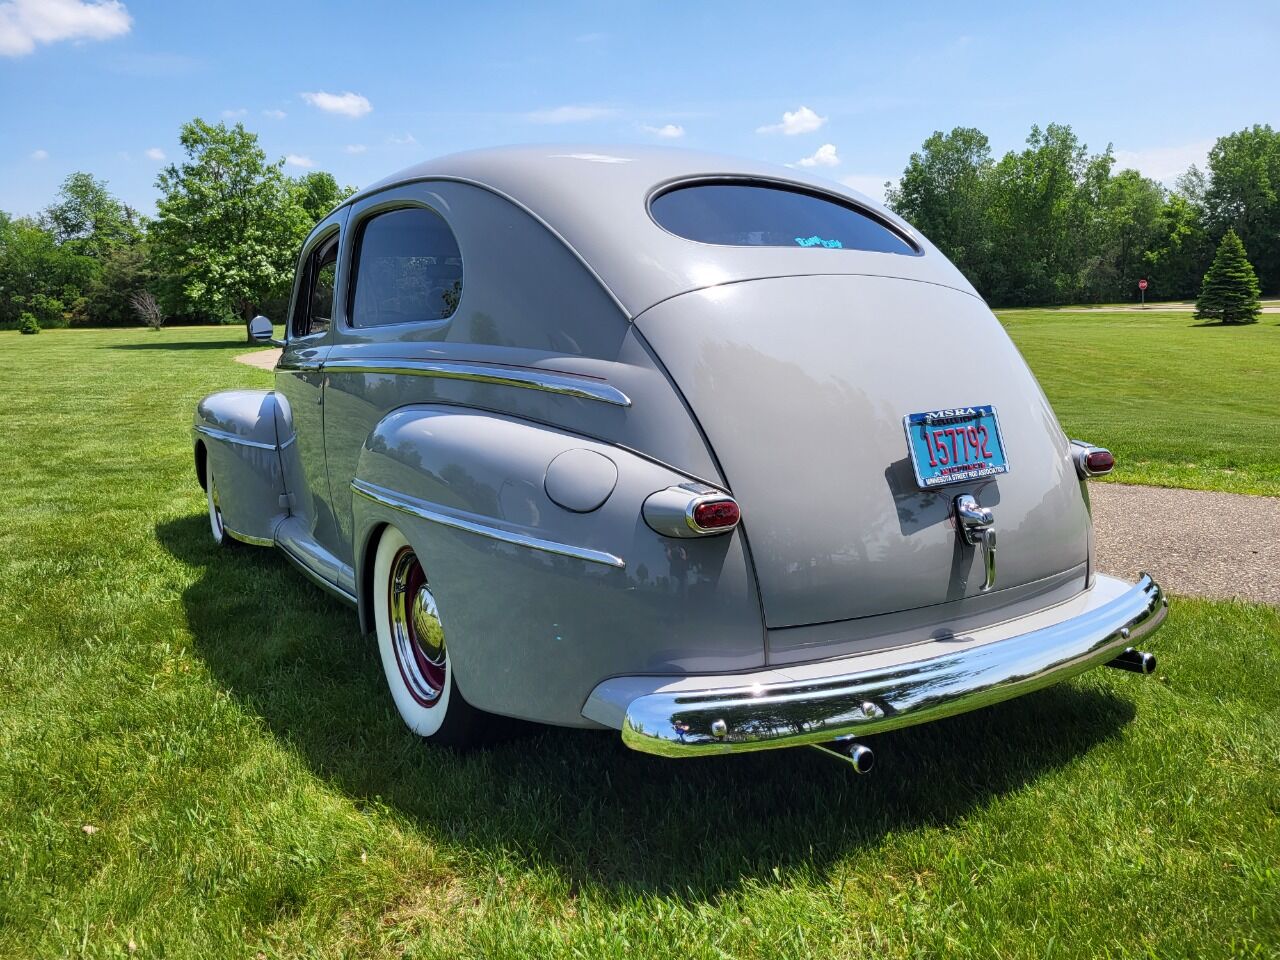 1948 Ford Super Deluxe 12